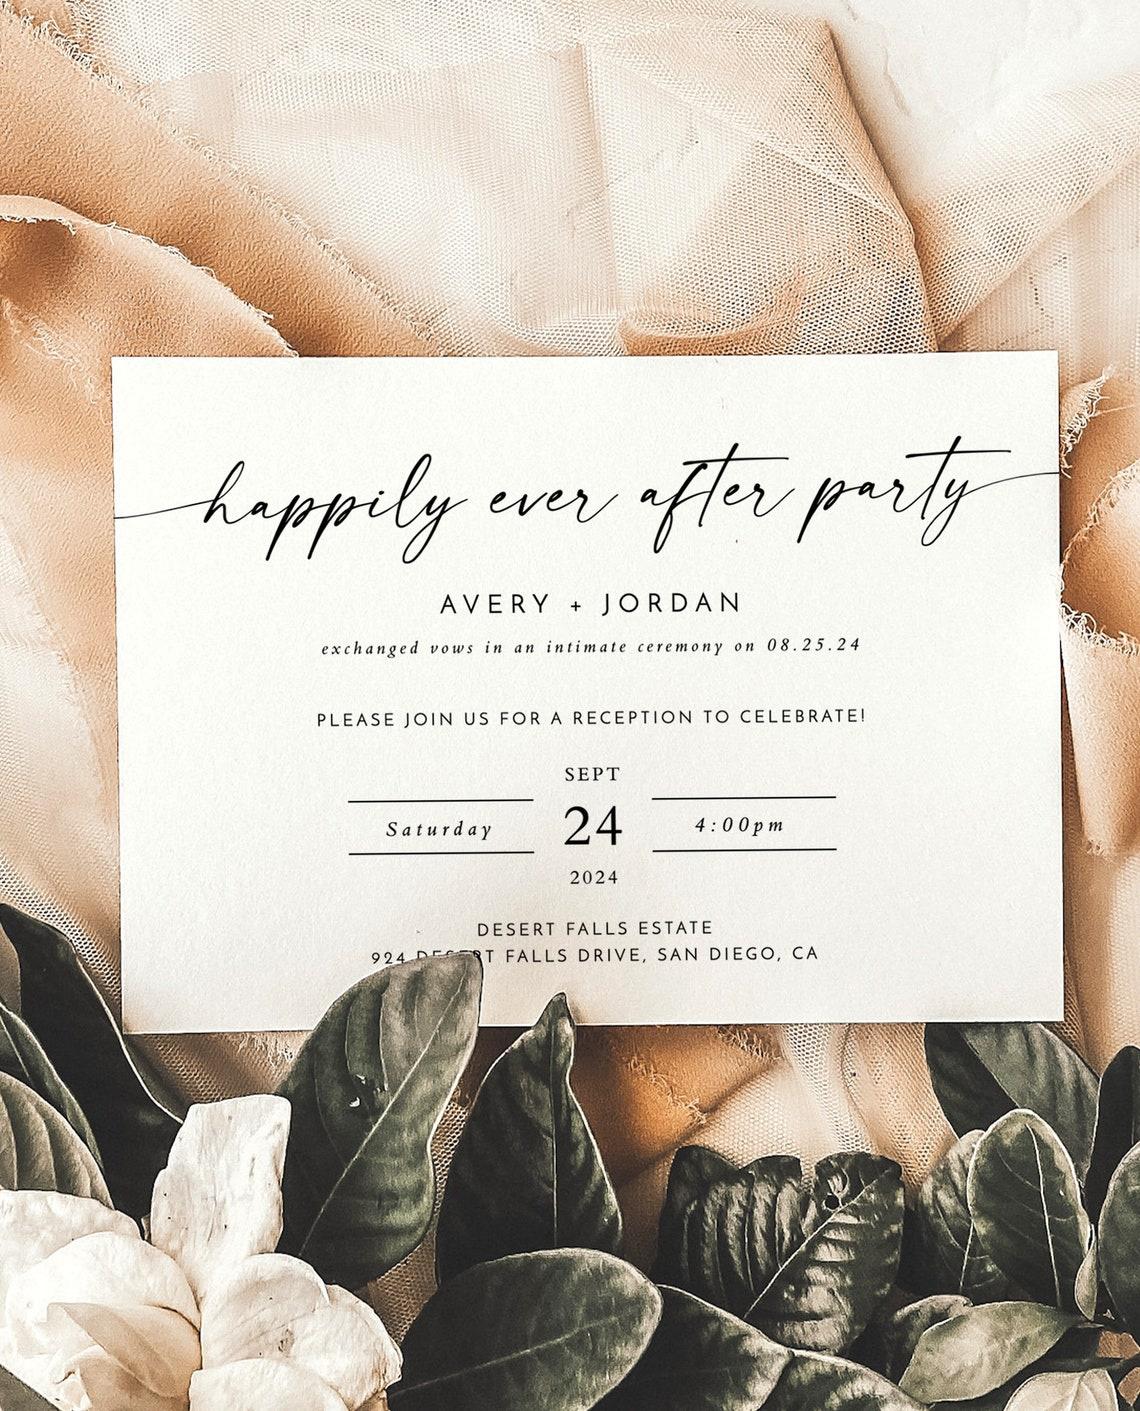 The 2022 Wedding Invitation Trends We Can't Get Enough Of